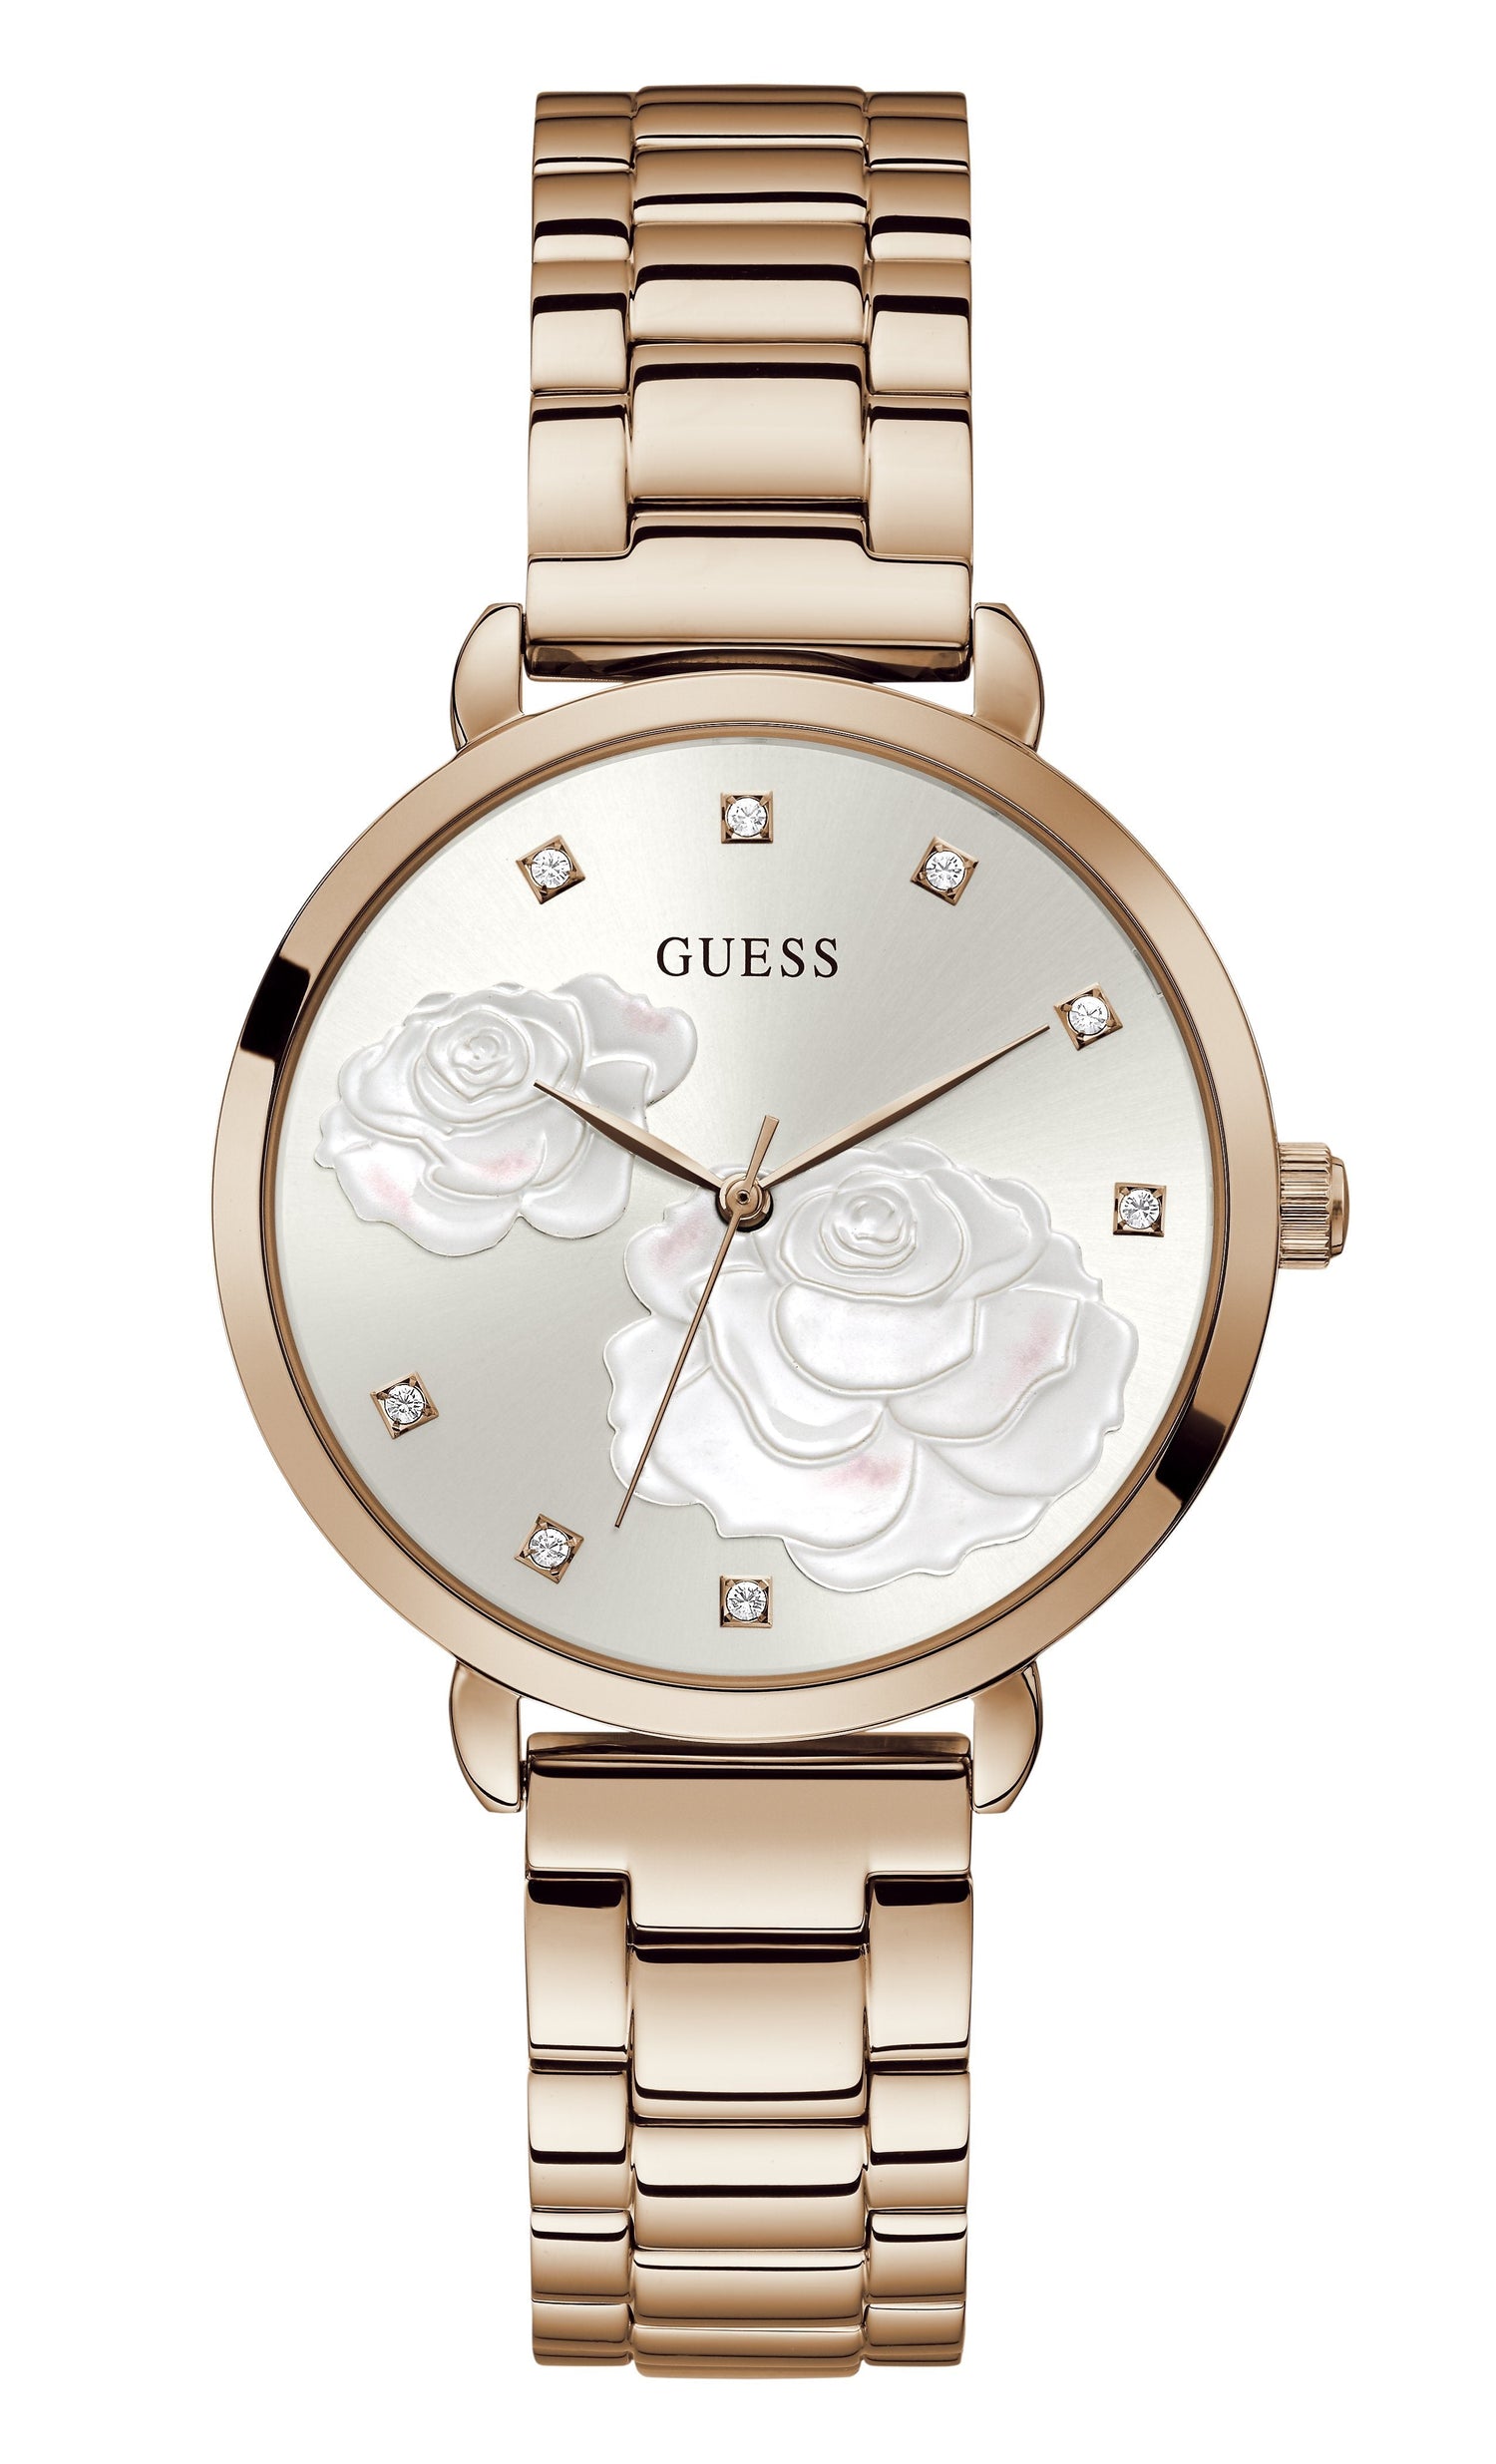 Guess Sparkling Rose Gold Women's Watch GW0242L3 Watches Guess 